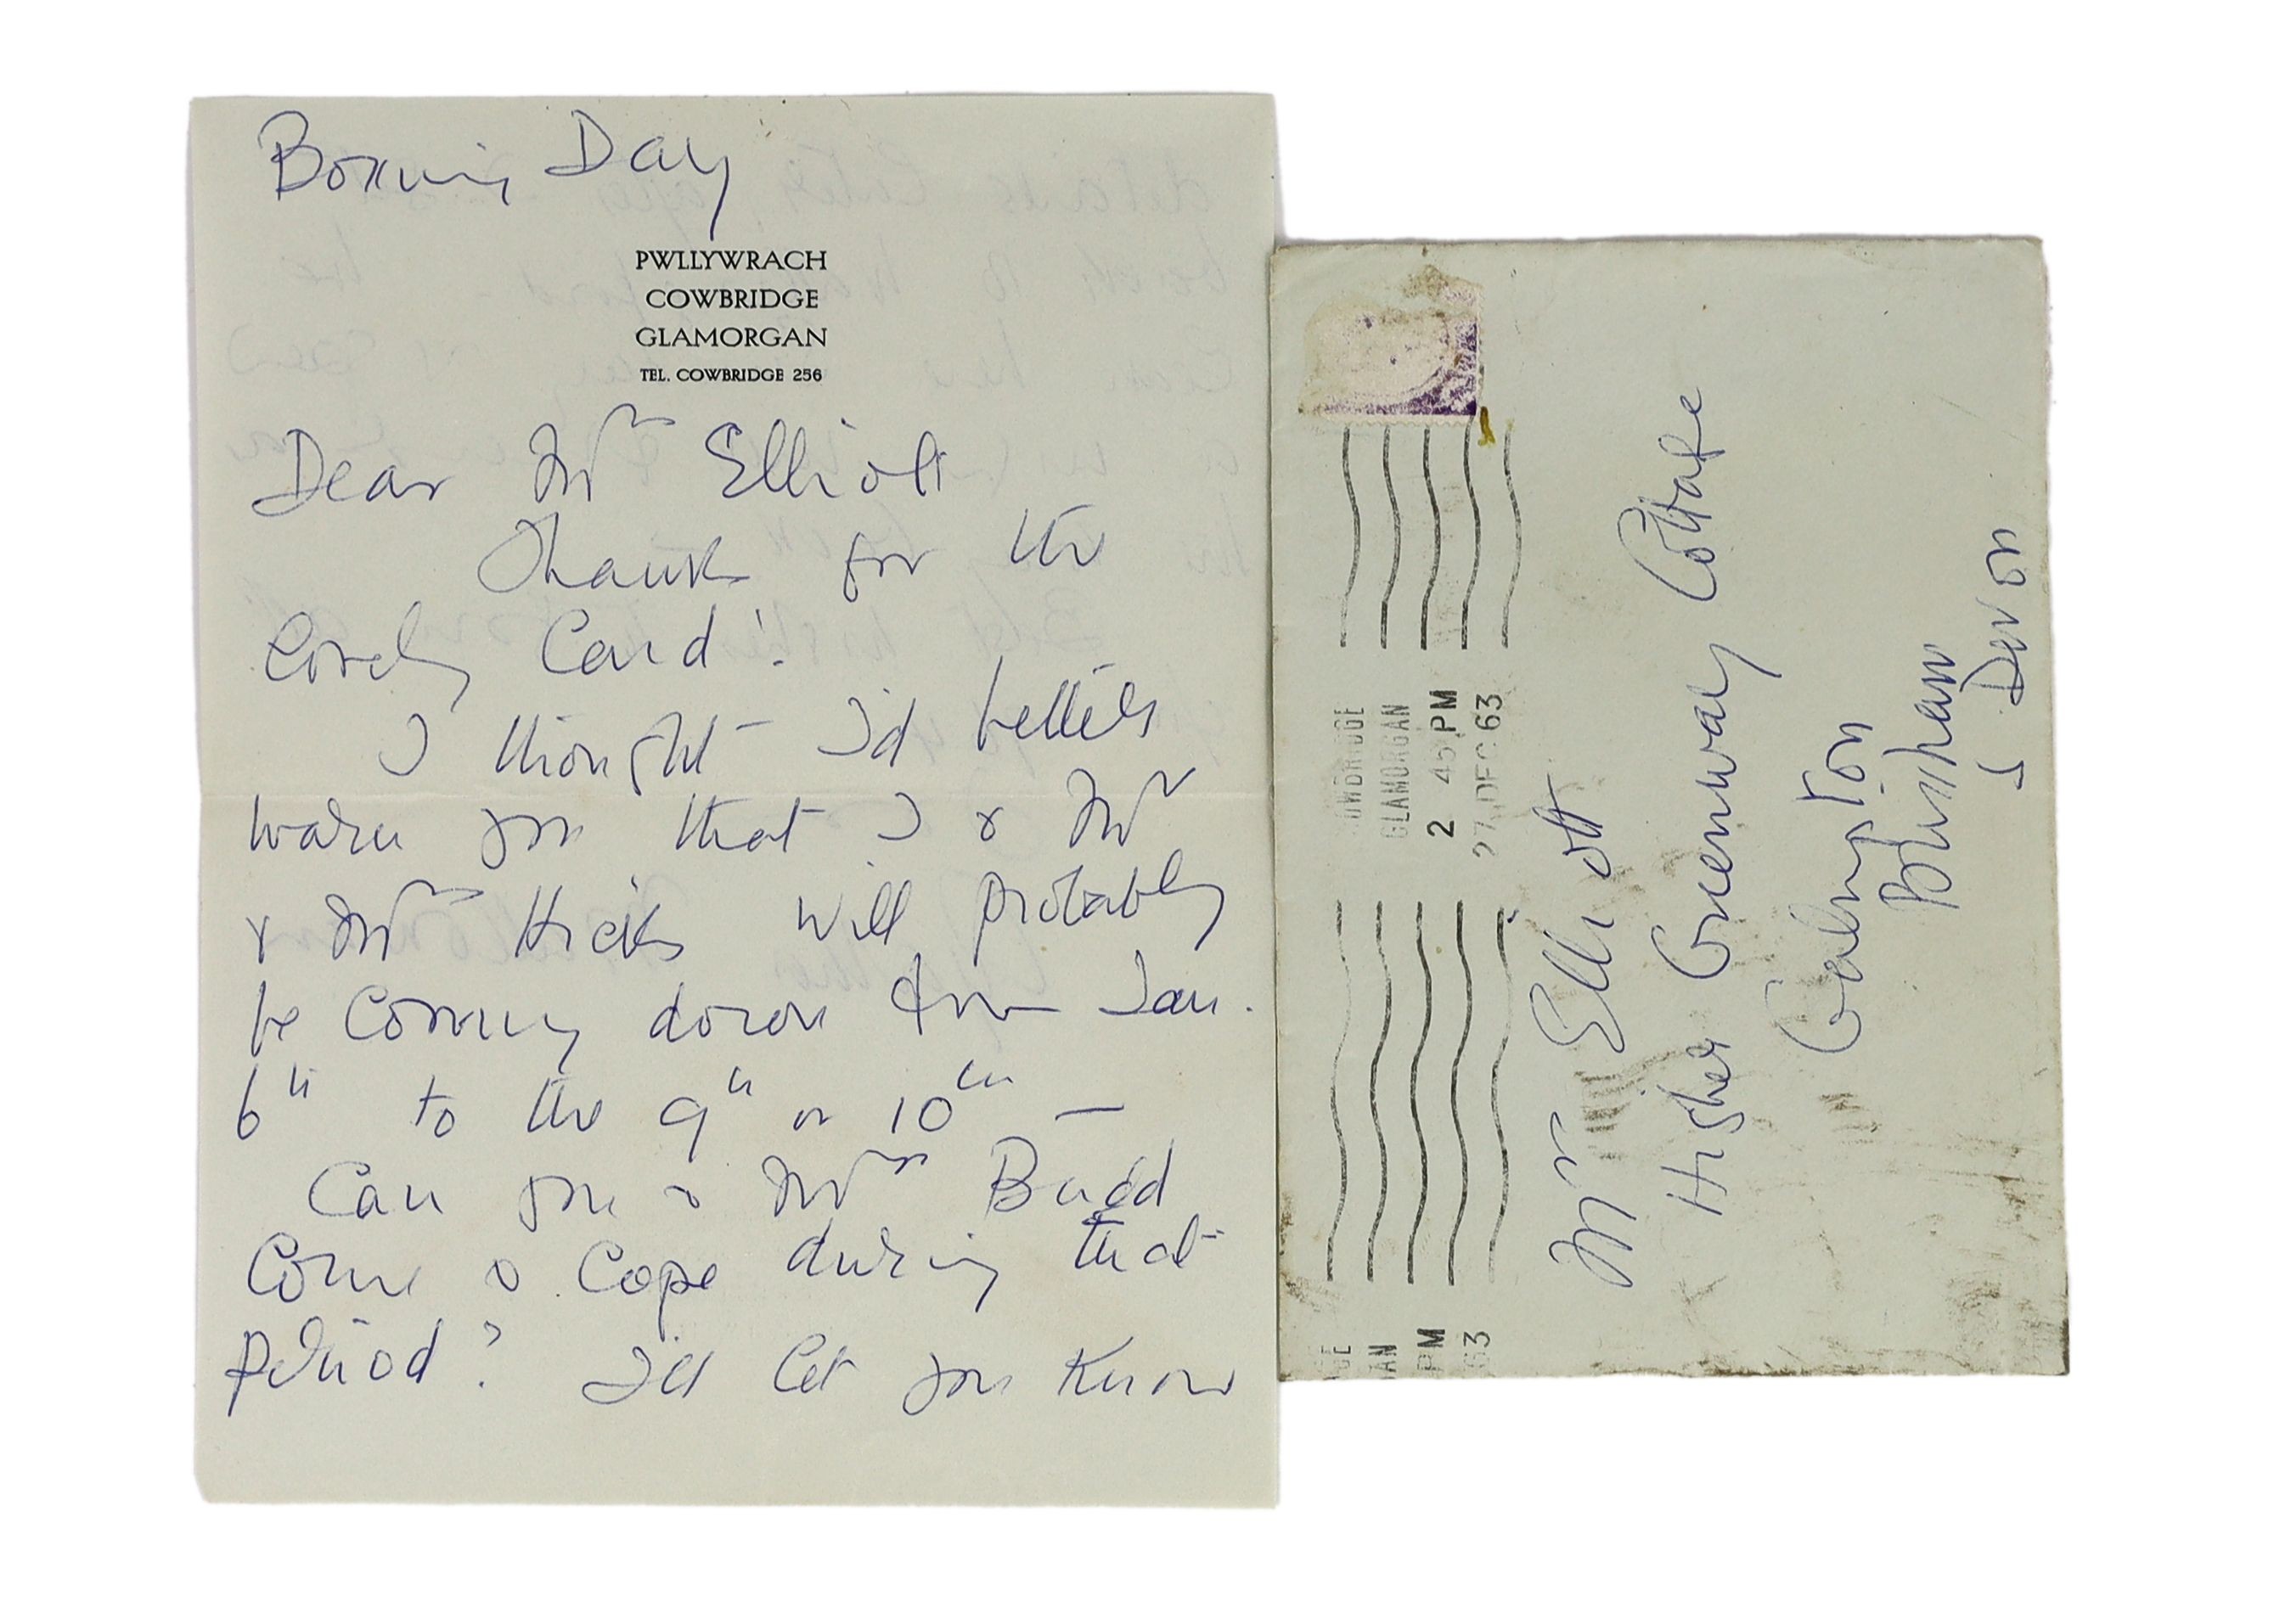 A manuscript letter from Agatha Christie to Mrs Elliot on Pwllywrach notepaper